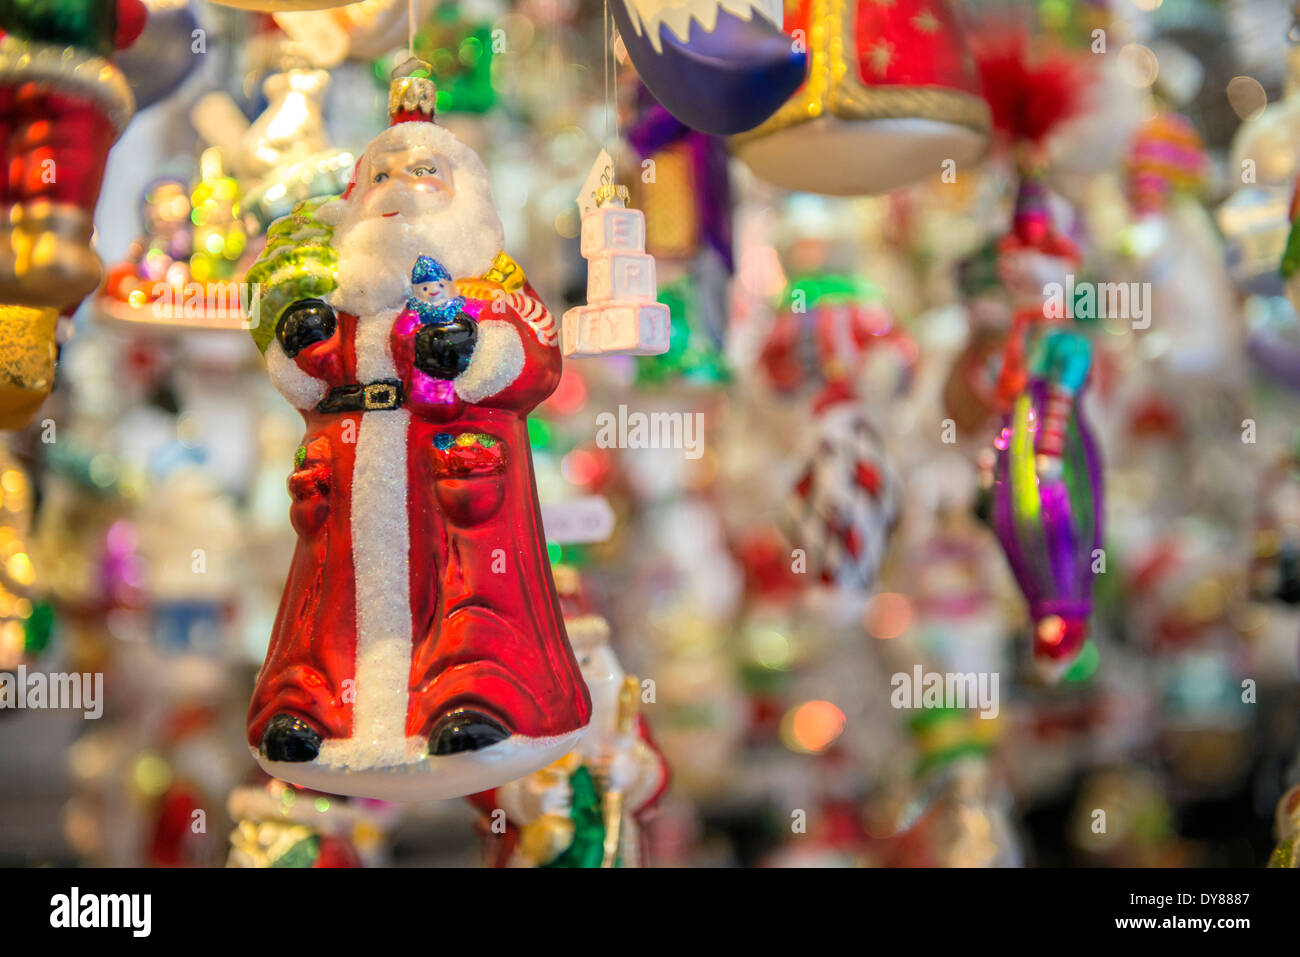 Traditional glass ornaments at Christmas Market, Bamberg, Germany Stock ...